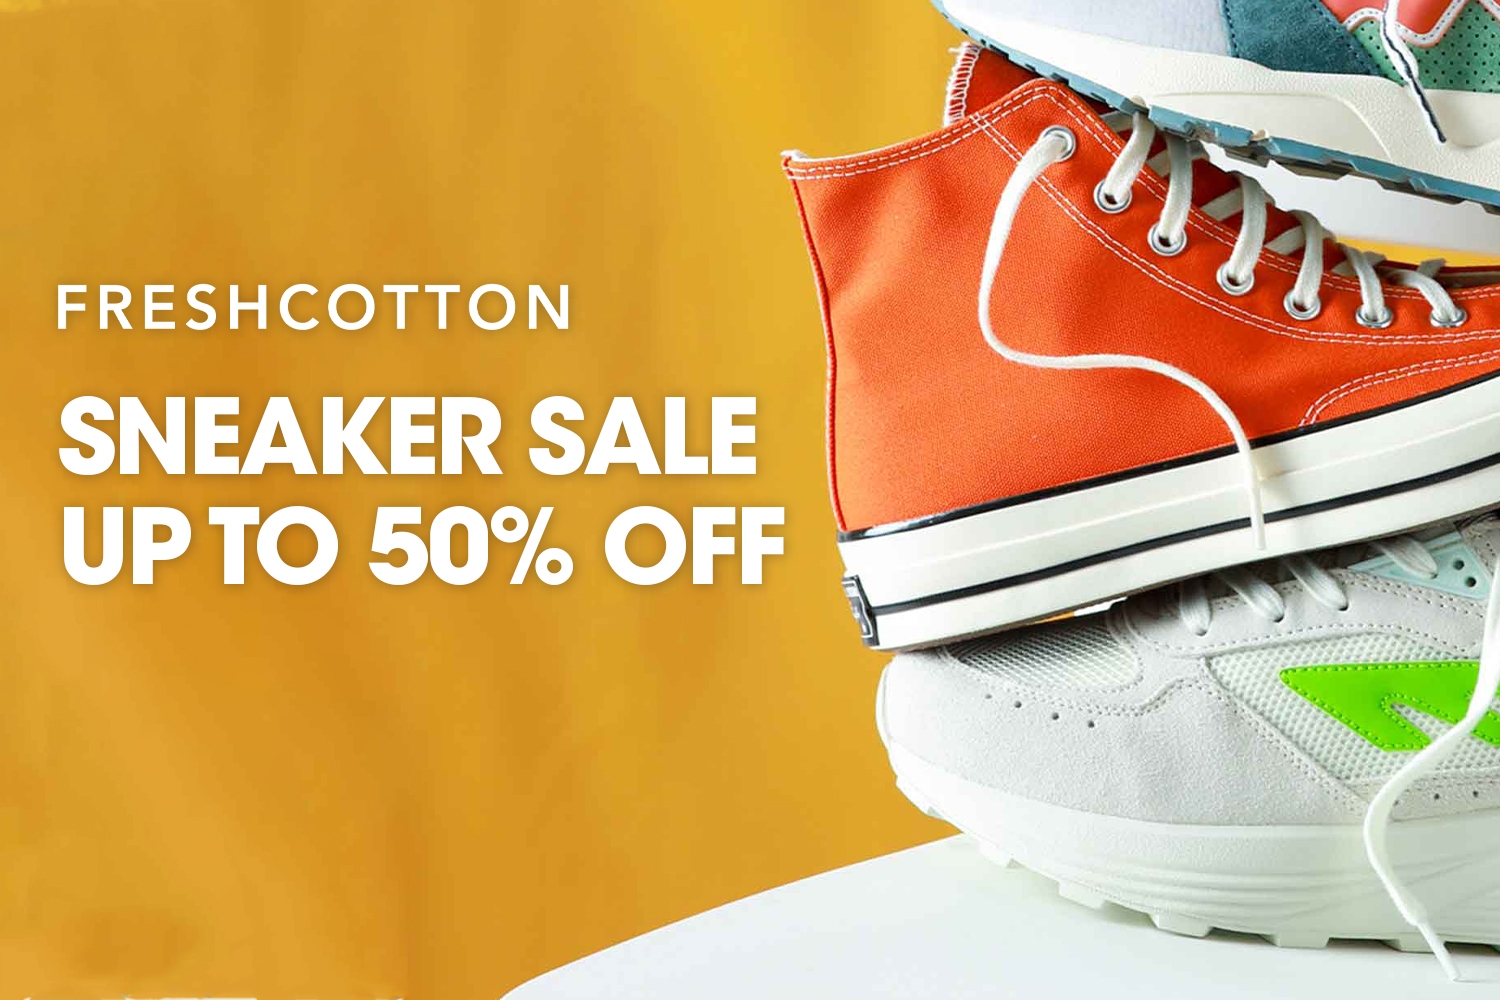 Get up to 50% off during the Freshcotton sale